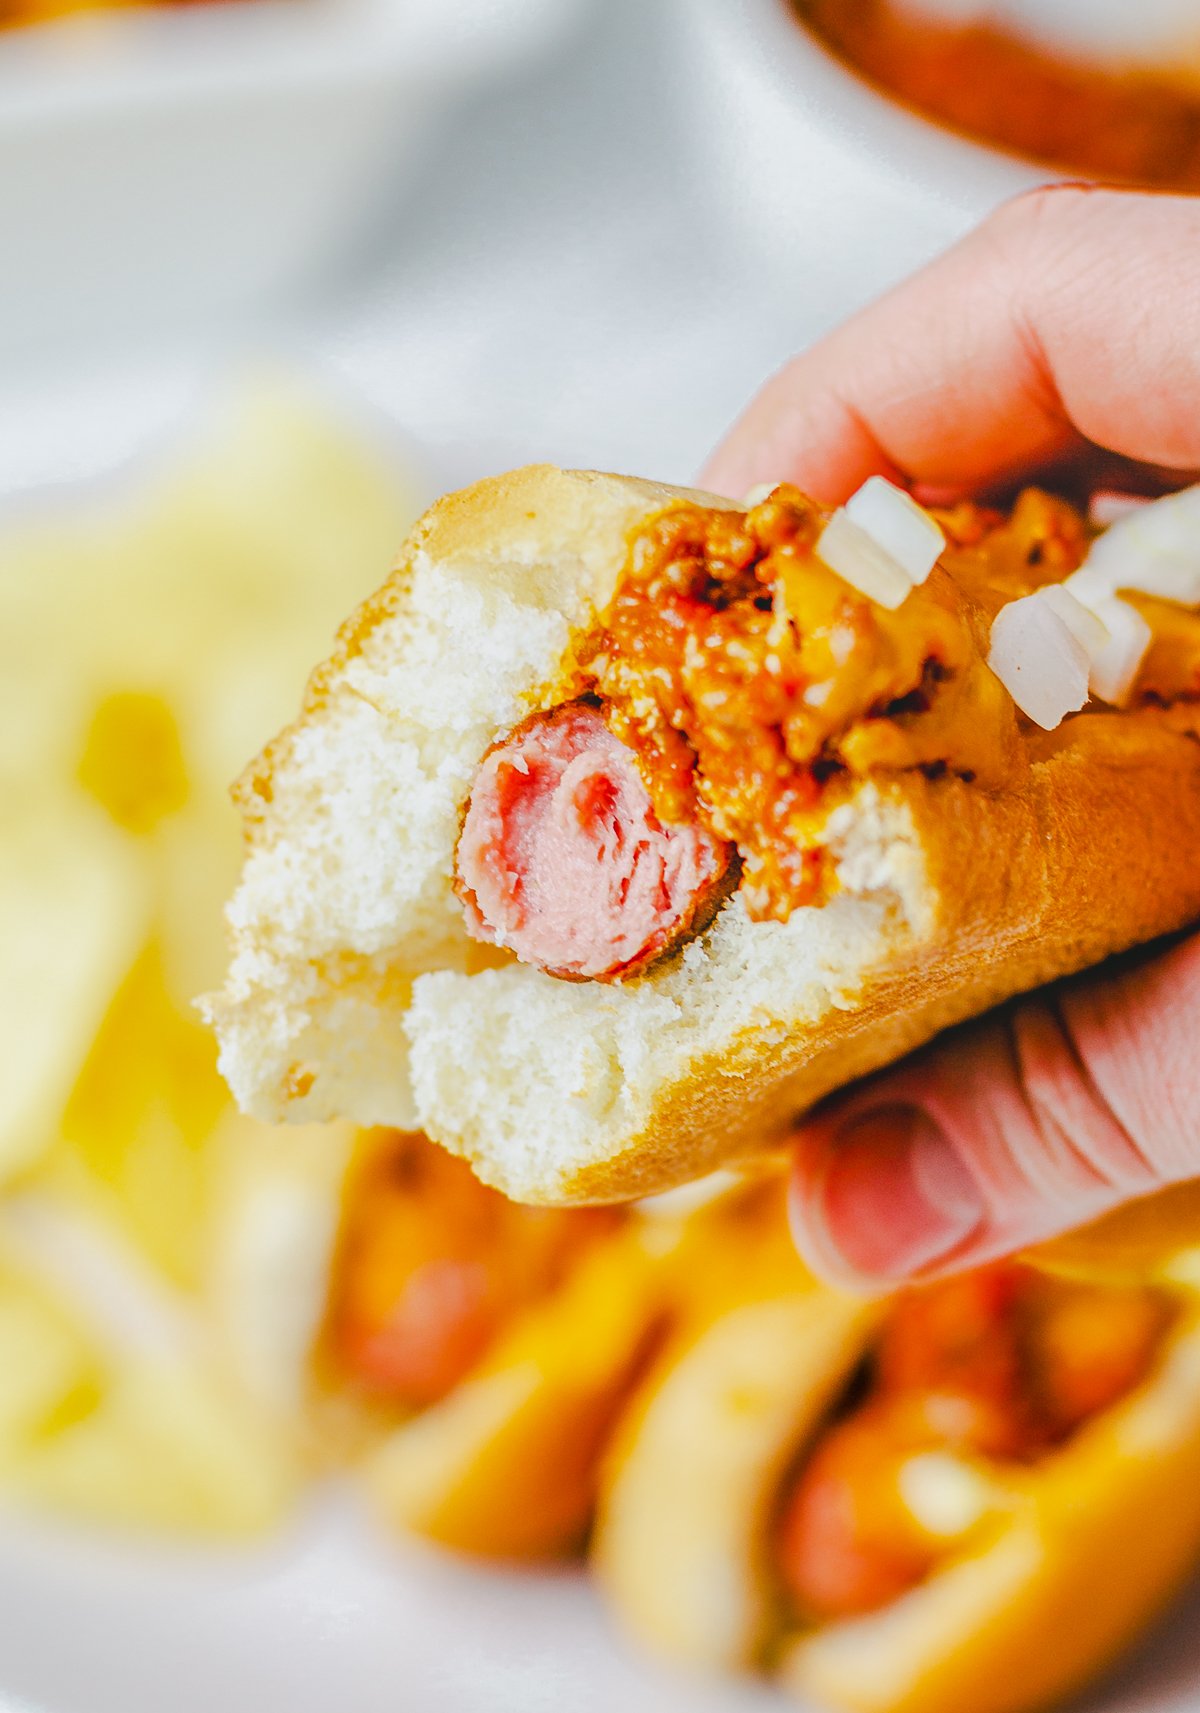 Bite taken out of hot dog being held by hand